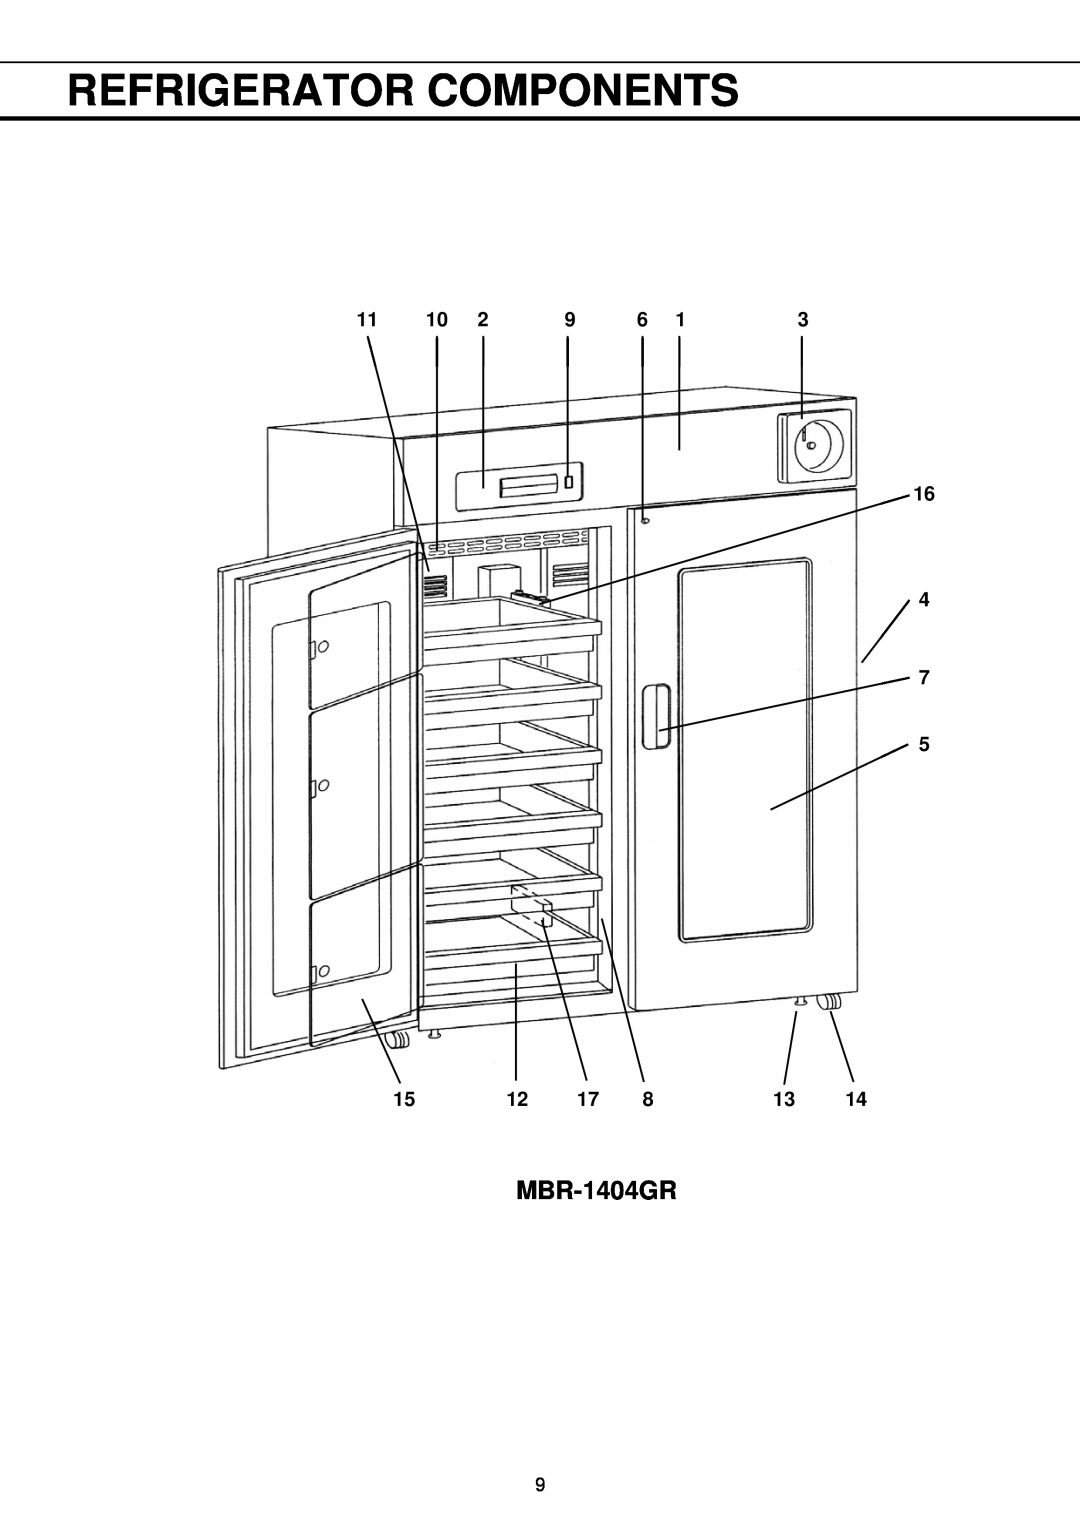 Sanyo MBR-1404GR instruction manual Refrigerator Components 